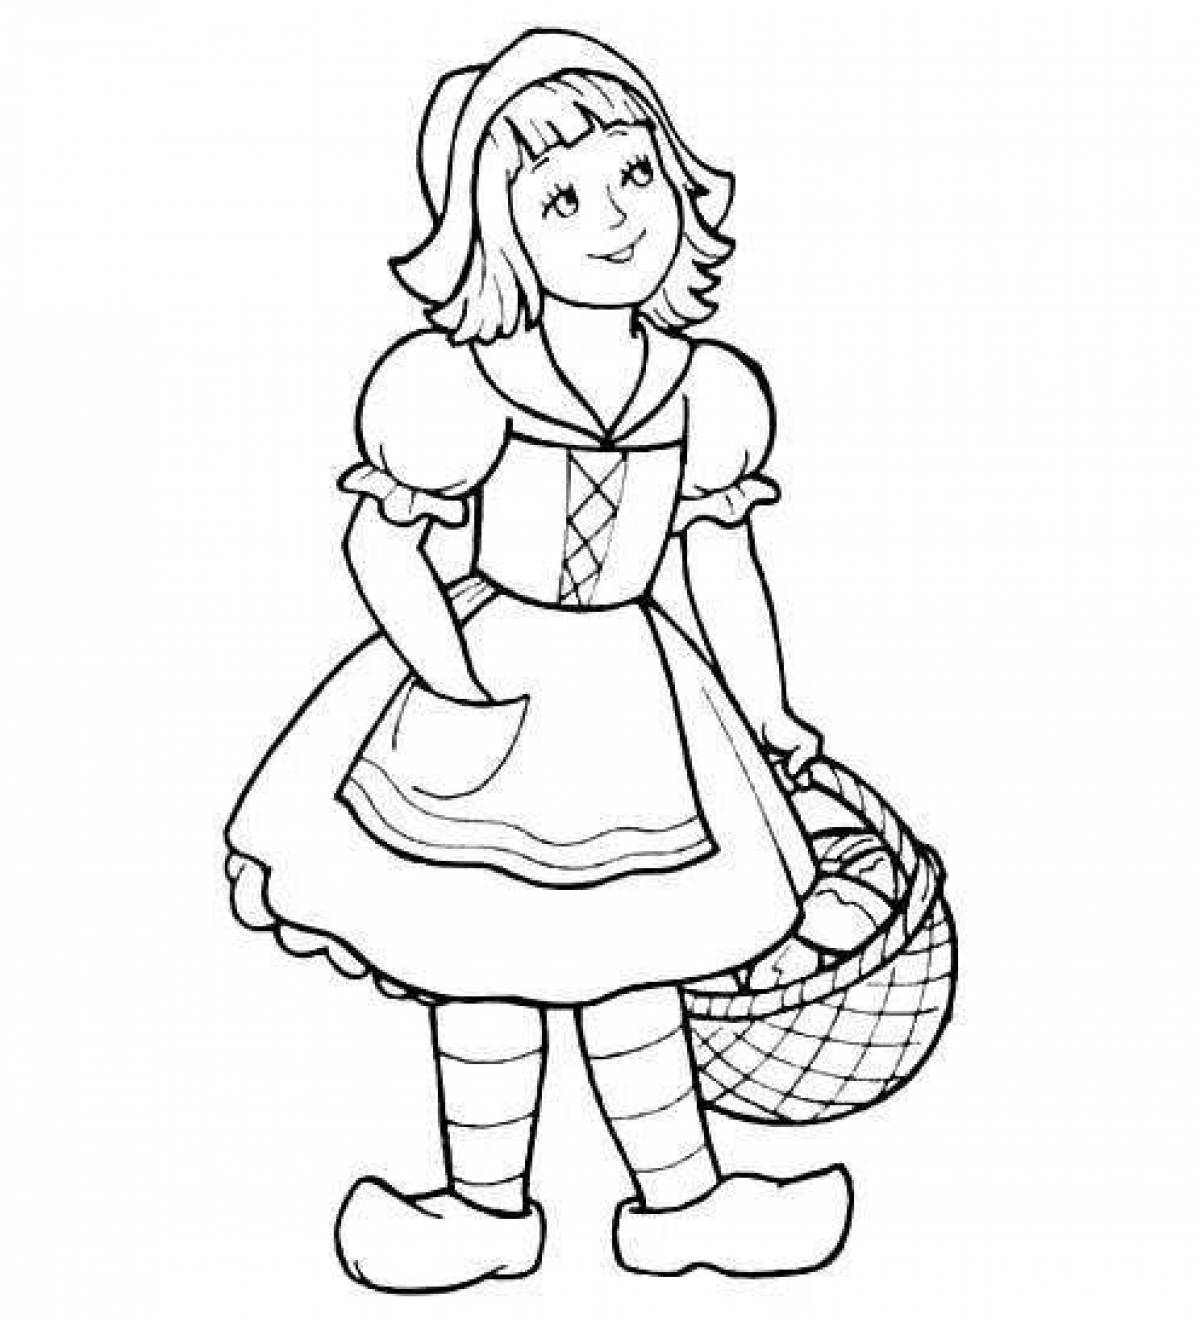 Amazing Charles Perrault Little Red Riding Hood coloring book